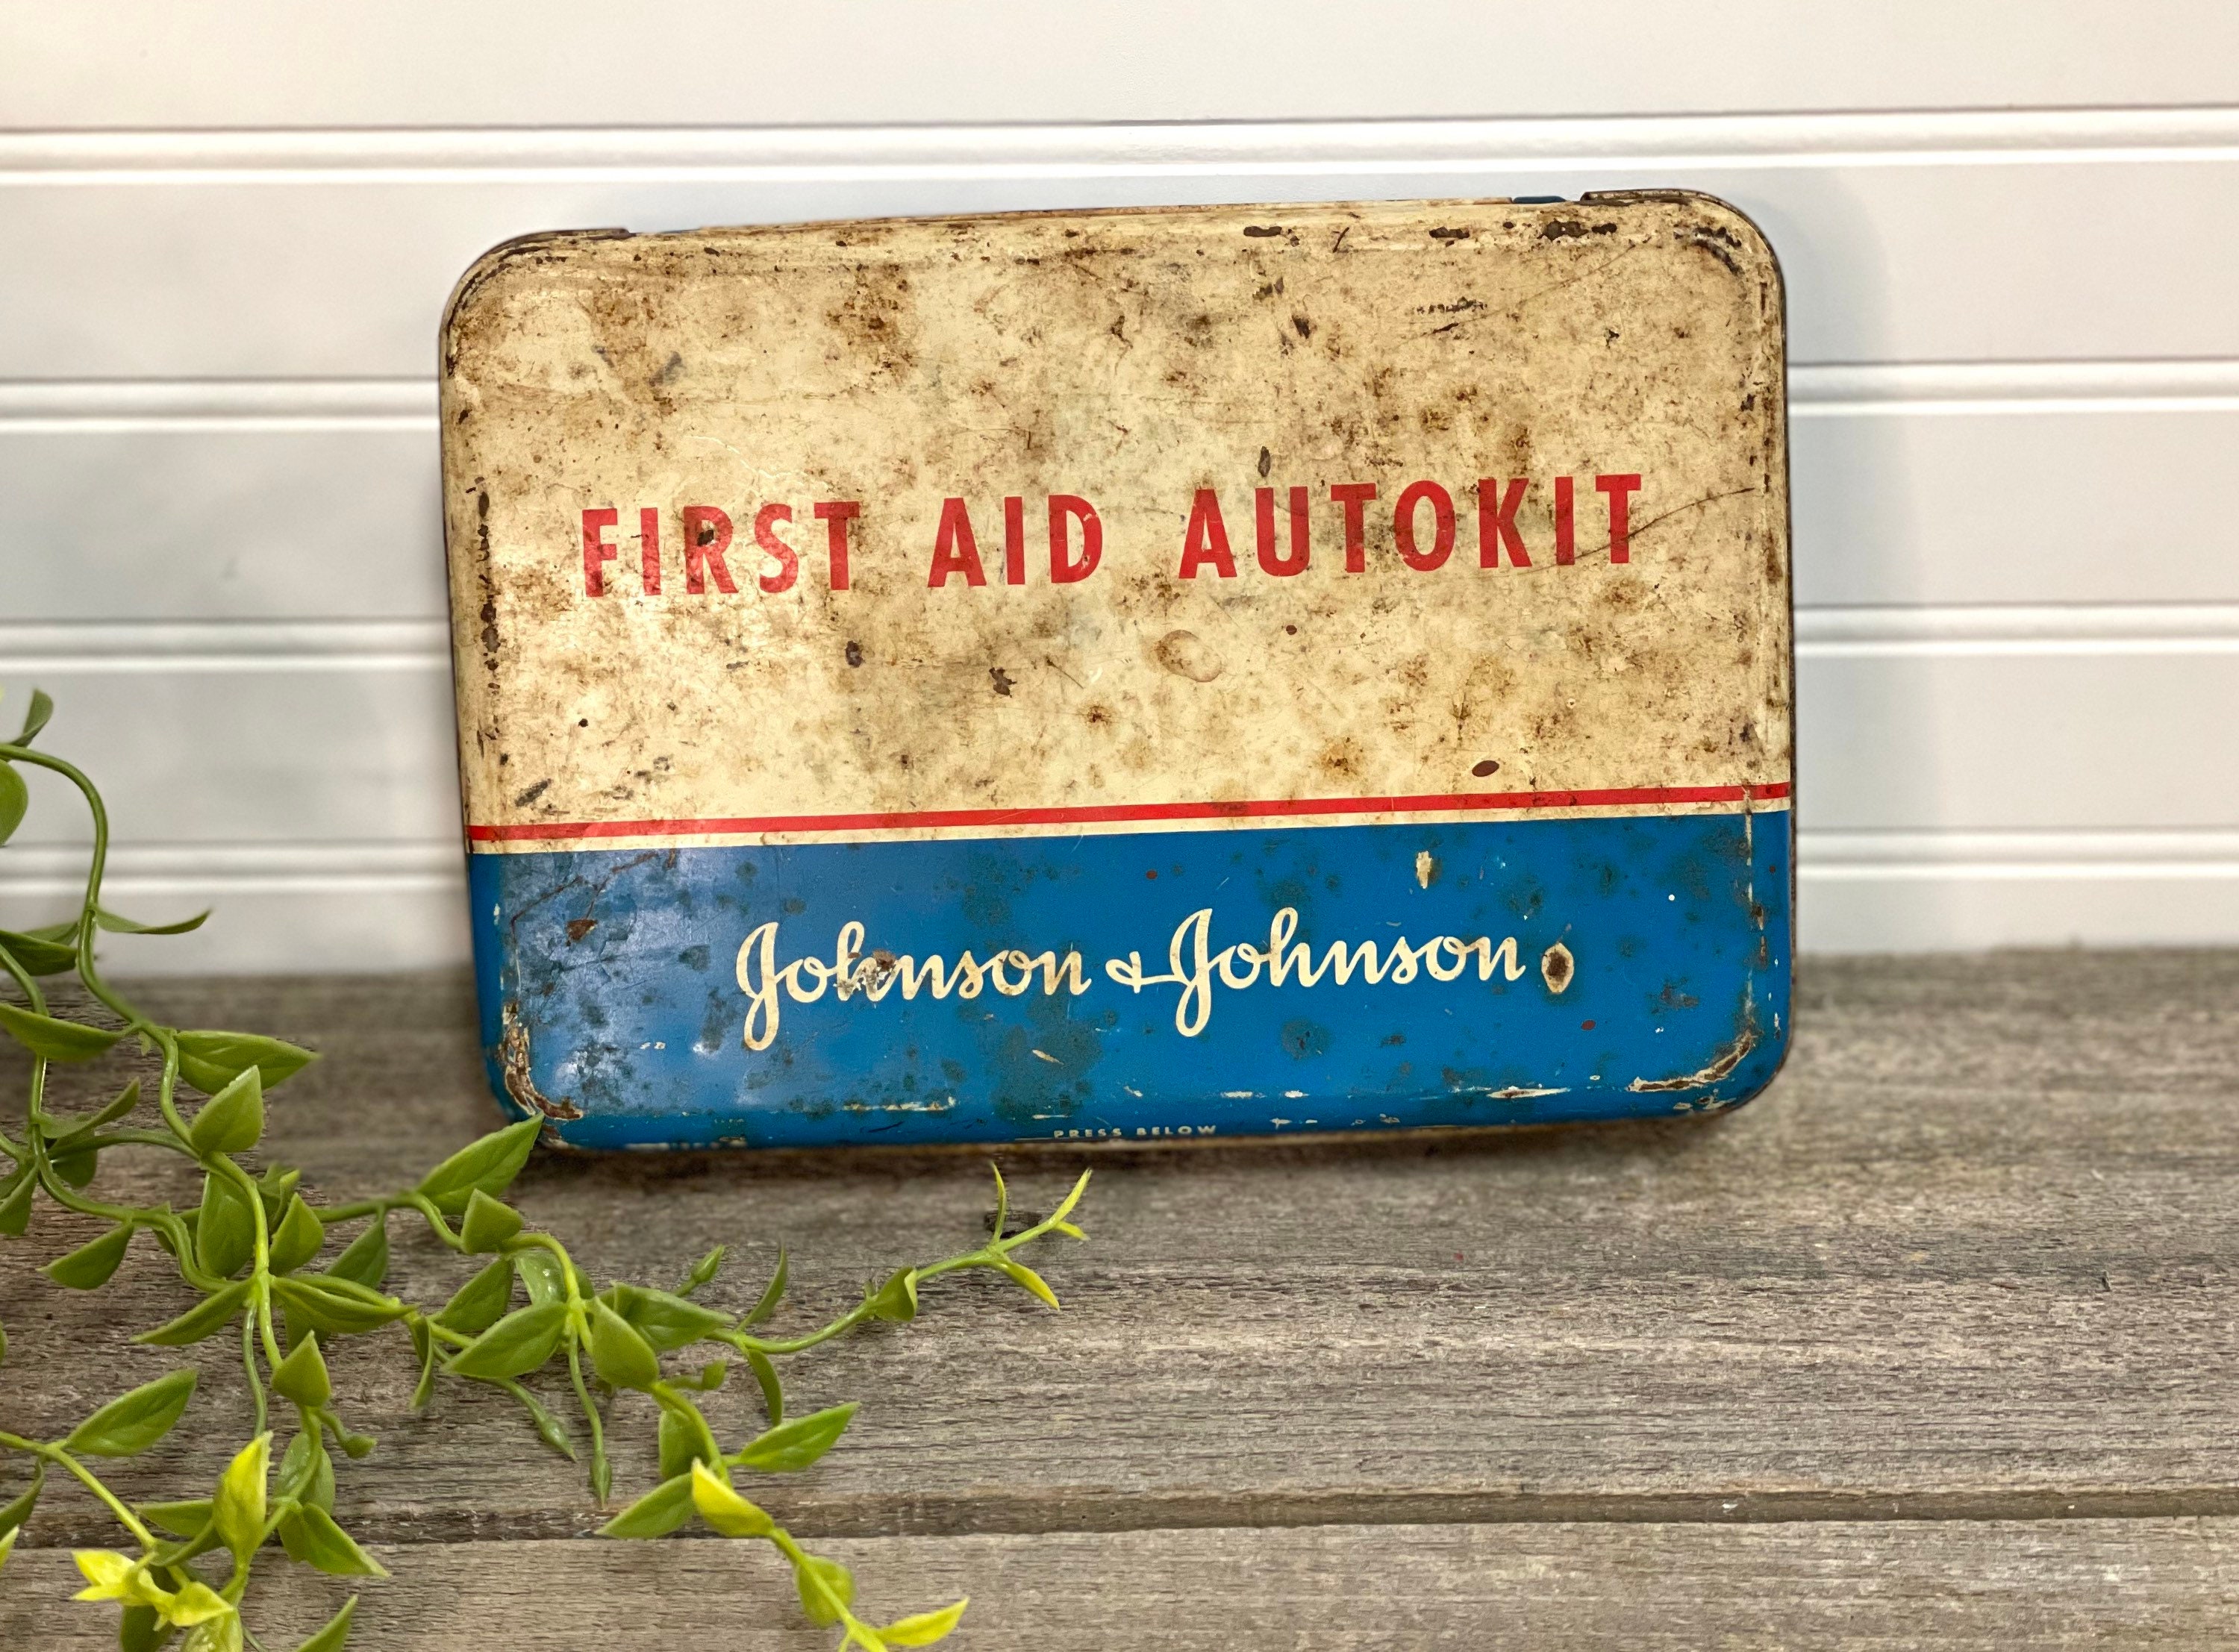 First Aid Kit, Johnson & Johnson Auto-travel, 1970's Metal Band Aid Box,  Gauze, Band Aids and More, Collectible Memorabilia 